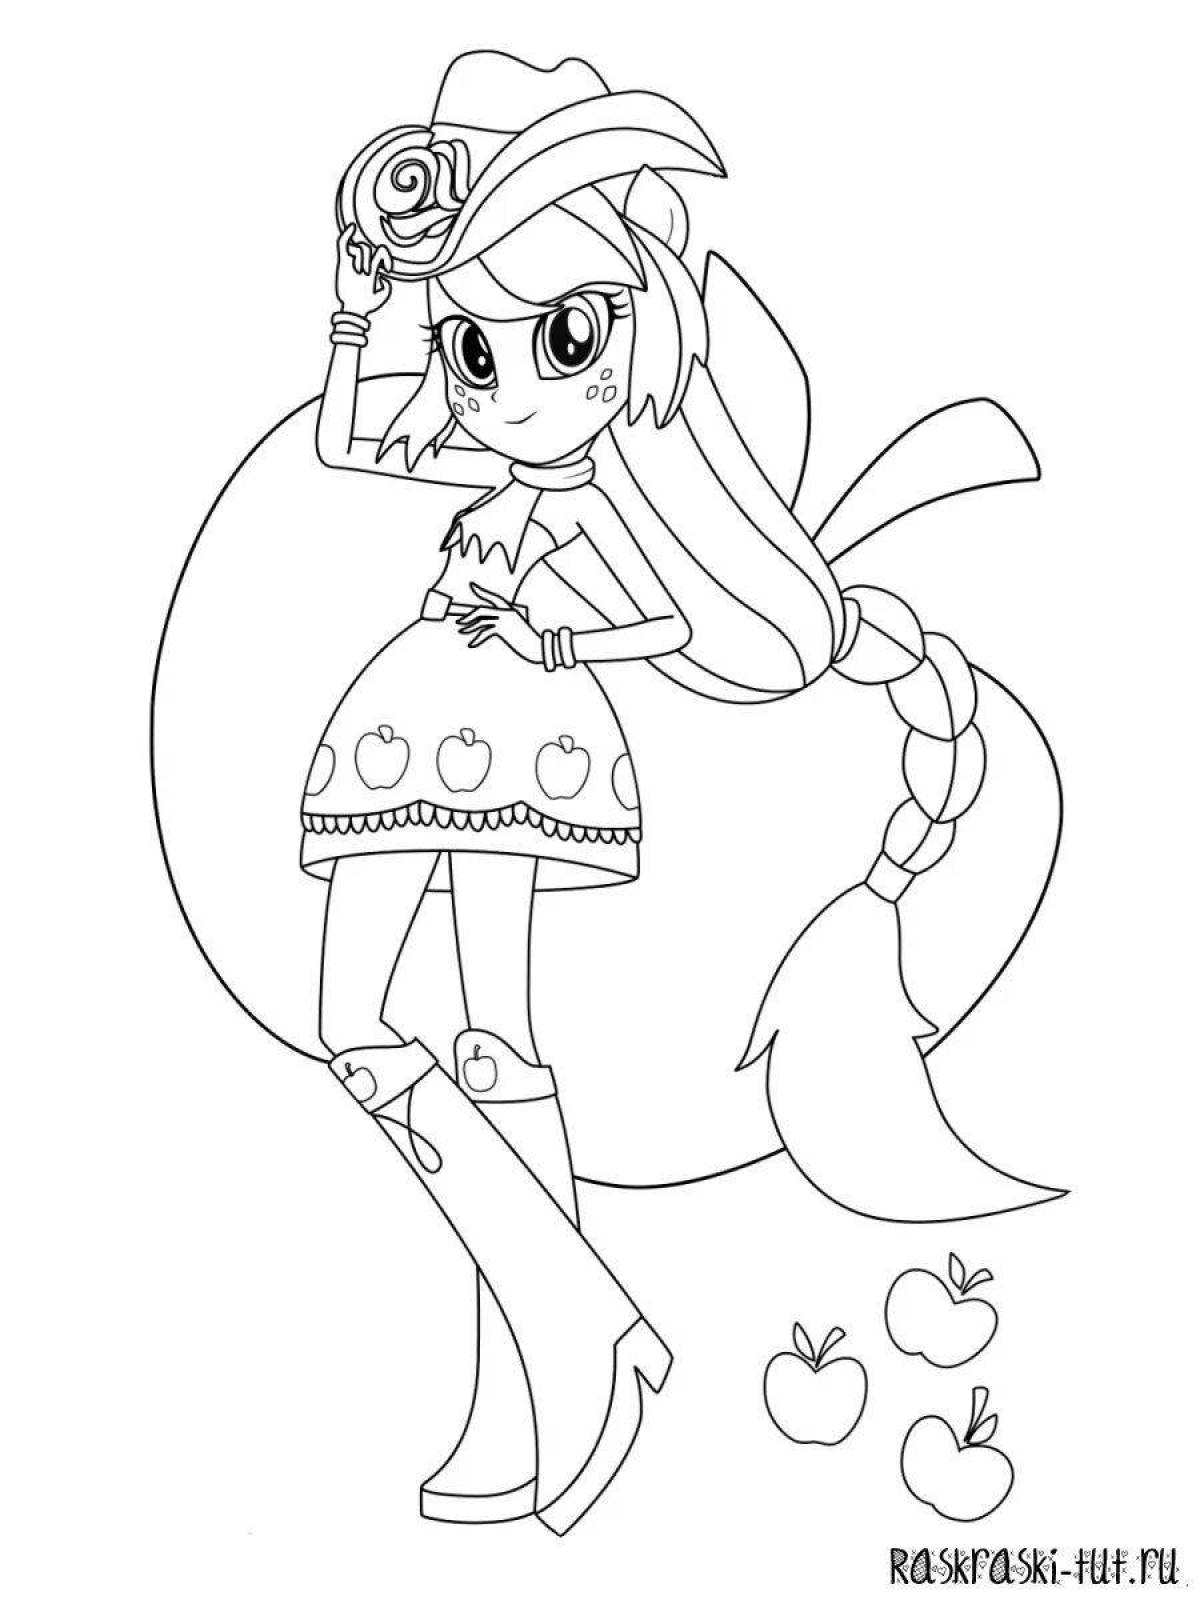 Radiant equestria girl sparkle coloring page